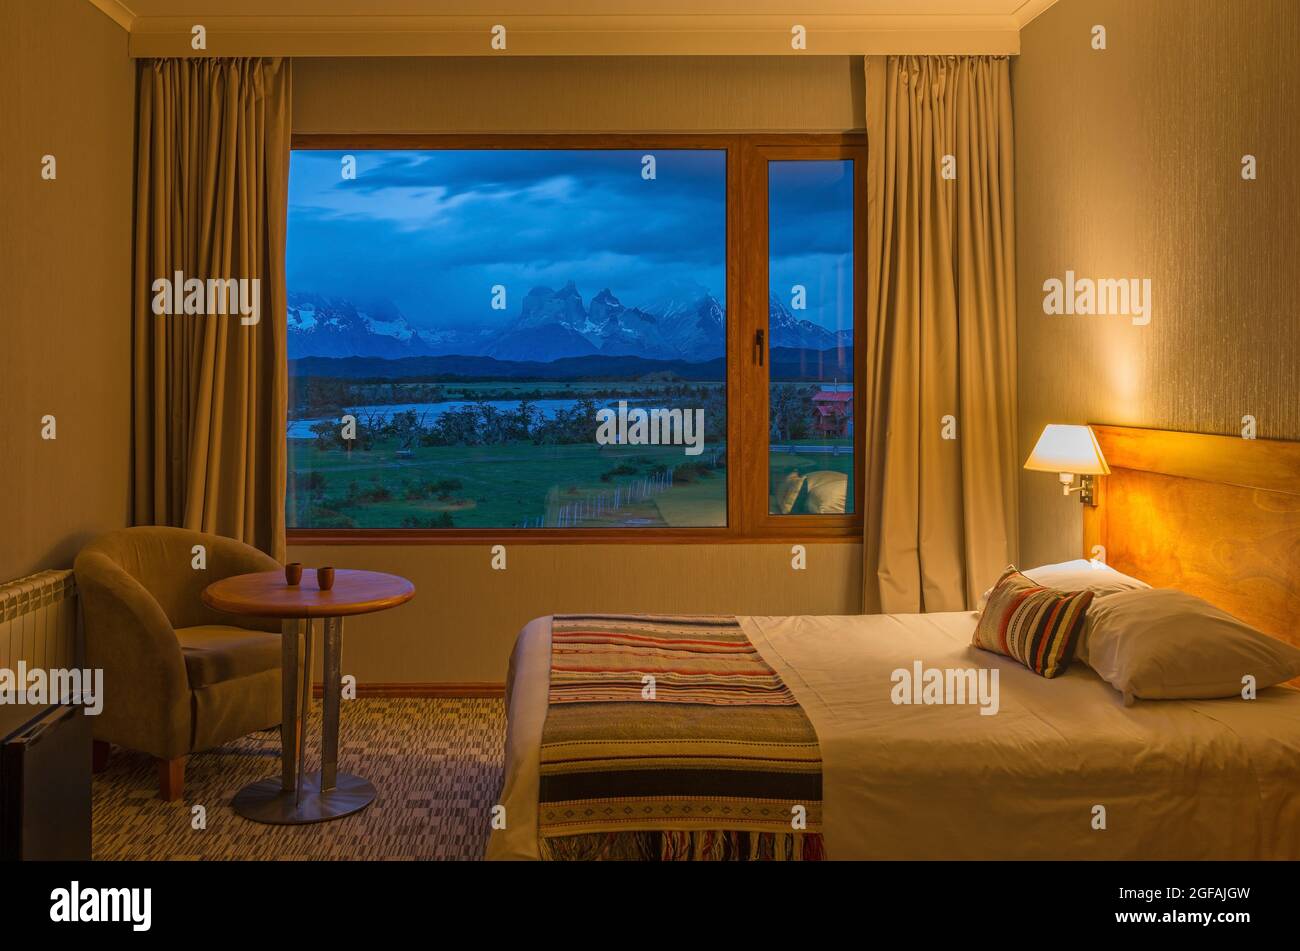 Hotel room interior with a long exposure view at night over the Cuernos del Paine, Torres del Paine national park, Patagonia, Chile. Stock Photo